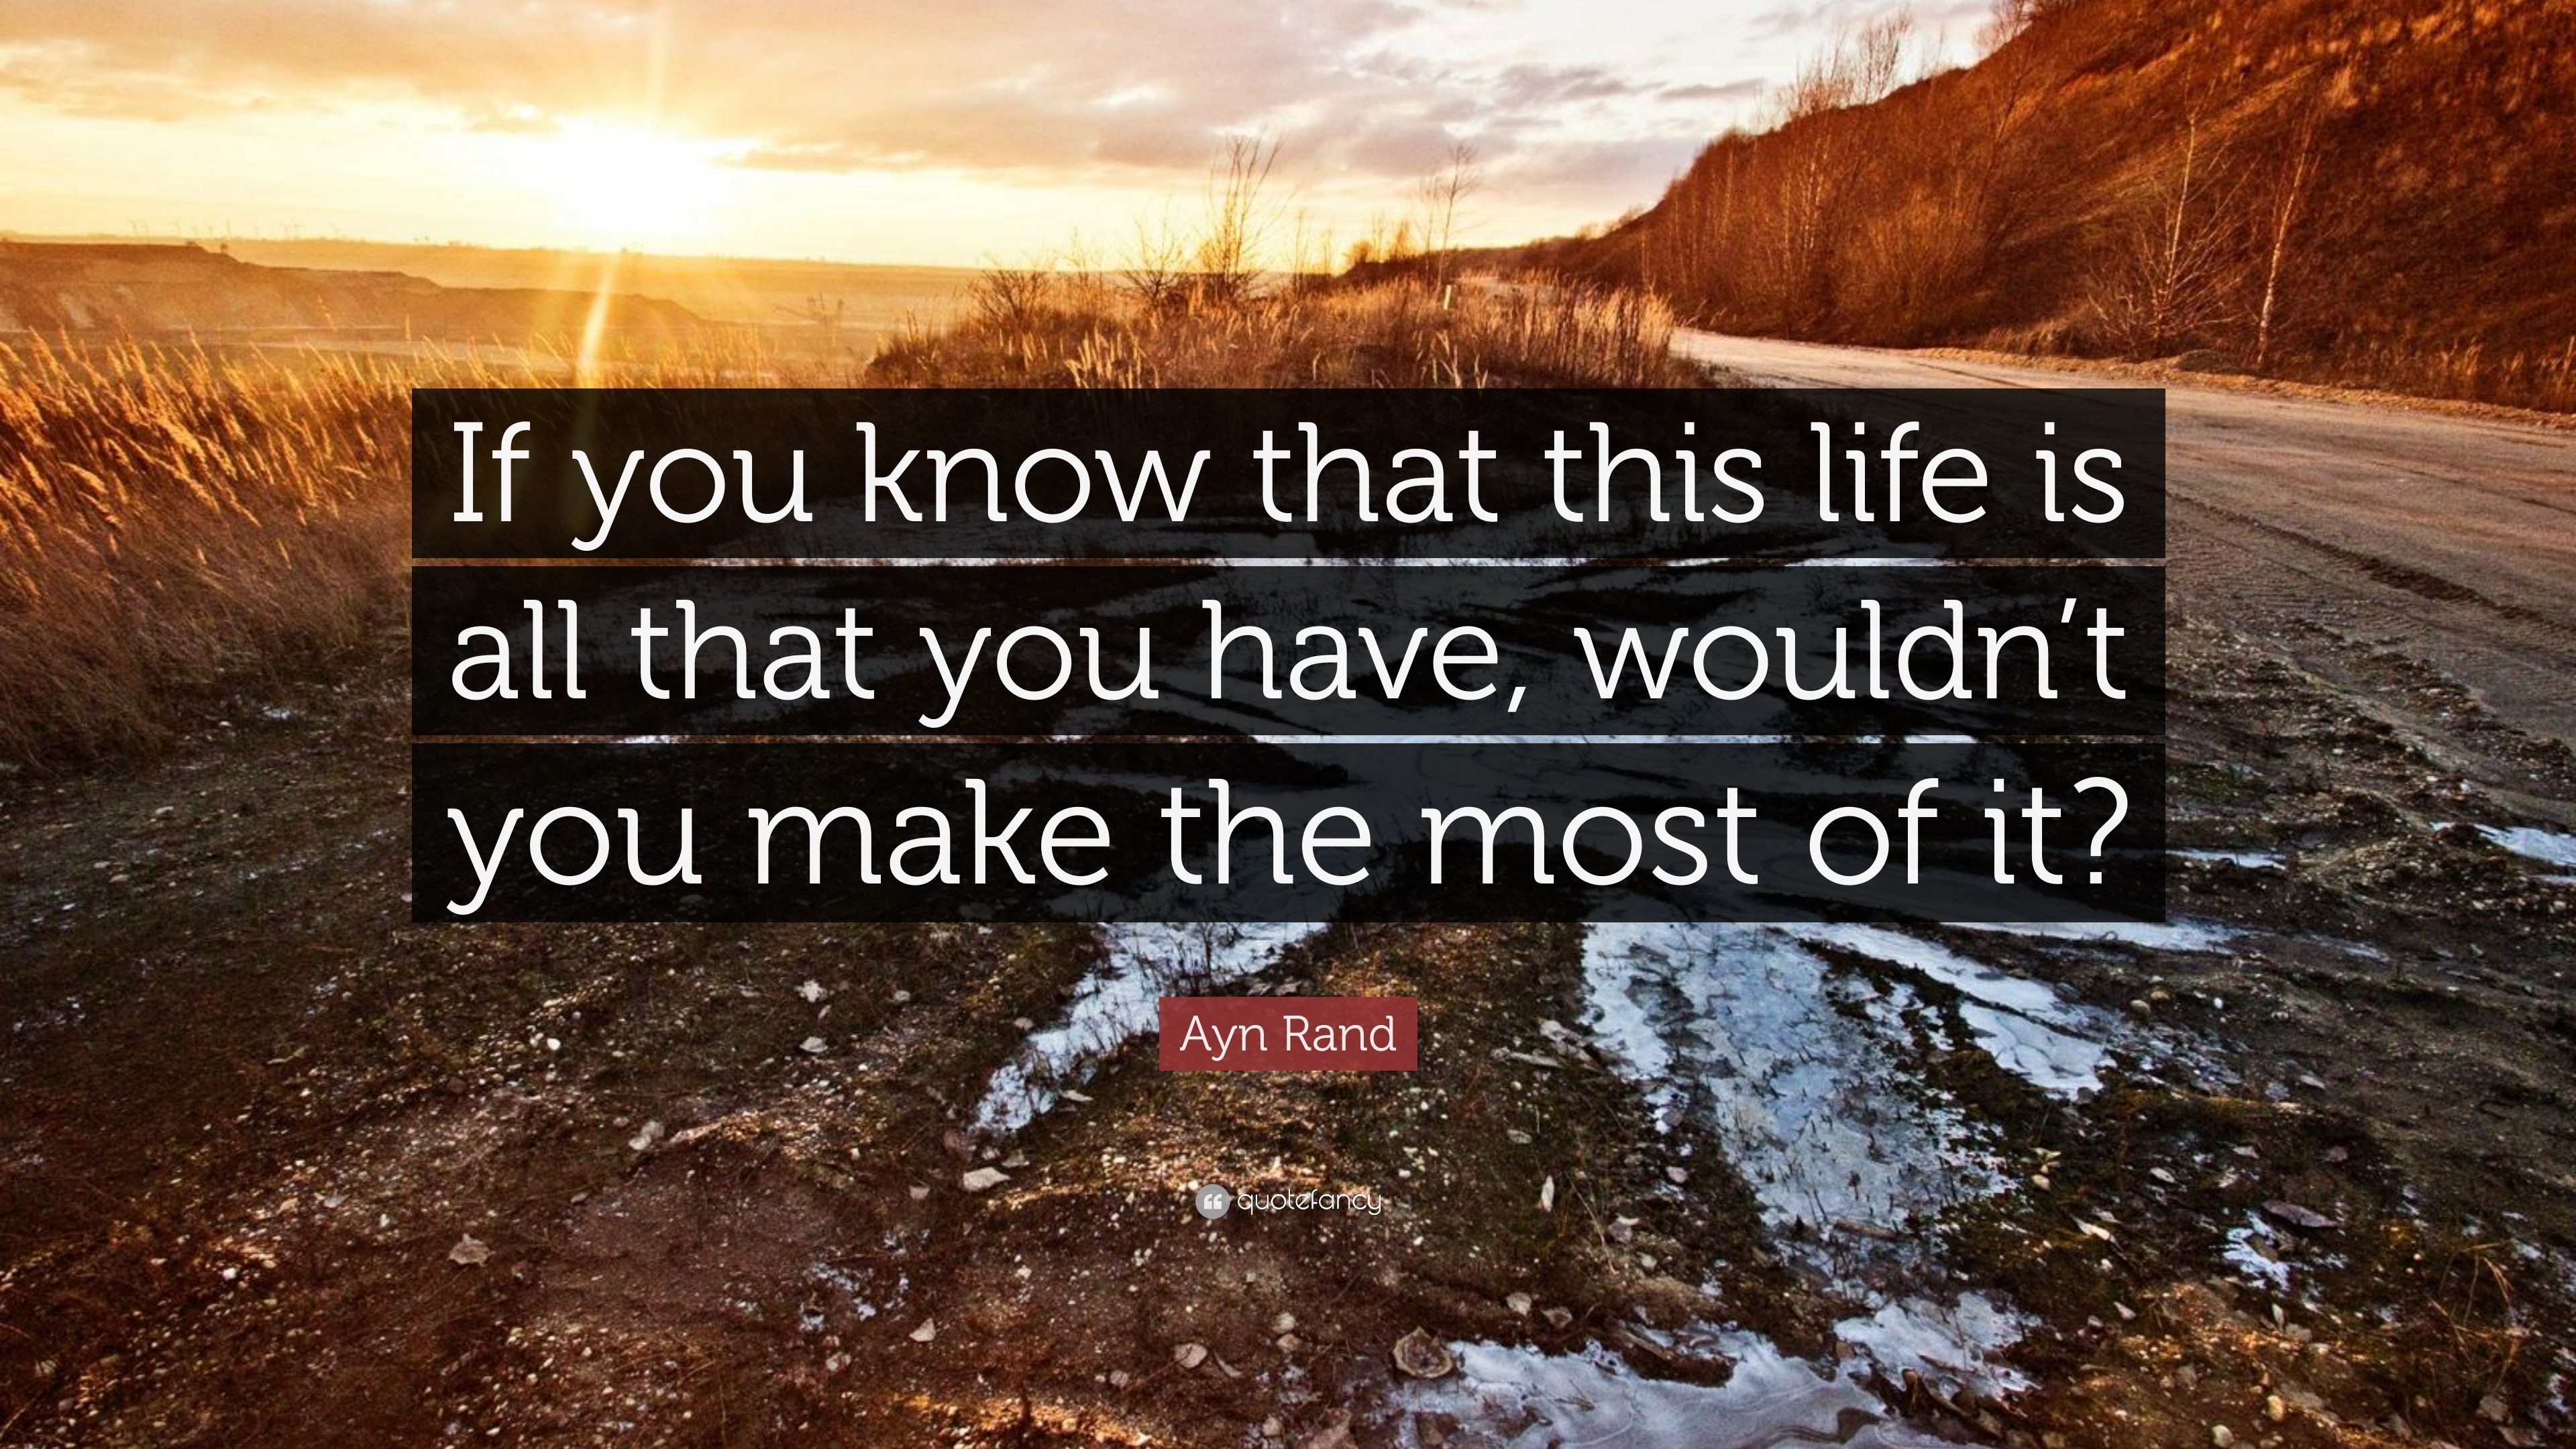 Ayn Rand Quote: “If you know that this life is all that you have ...